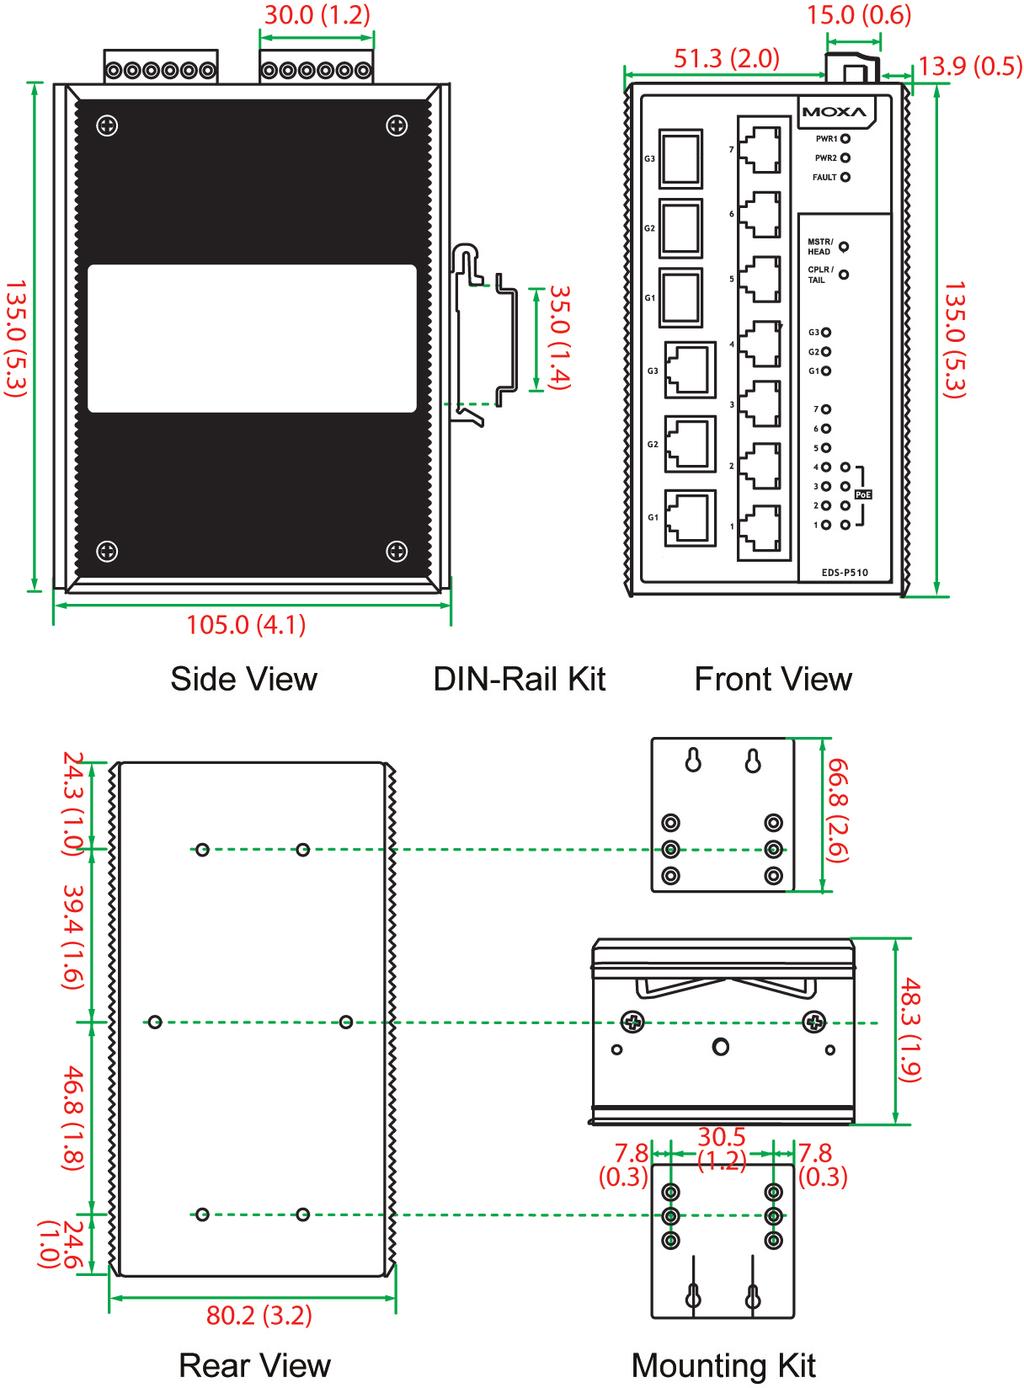 Mounting Dimensions Unit = mm (inch) DIN-Rail Mounting The aluminum DIN-Rail attachment plate should